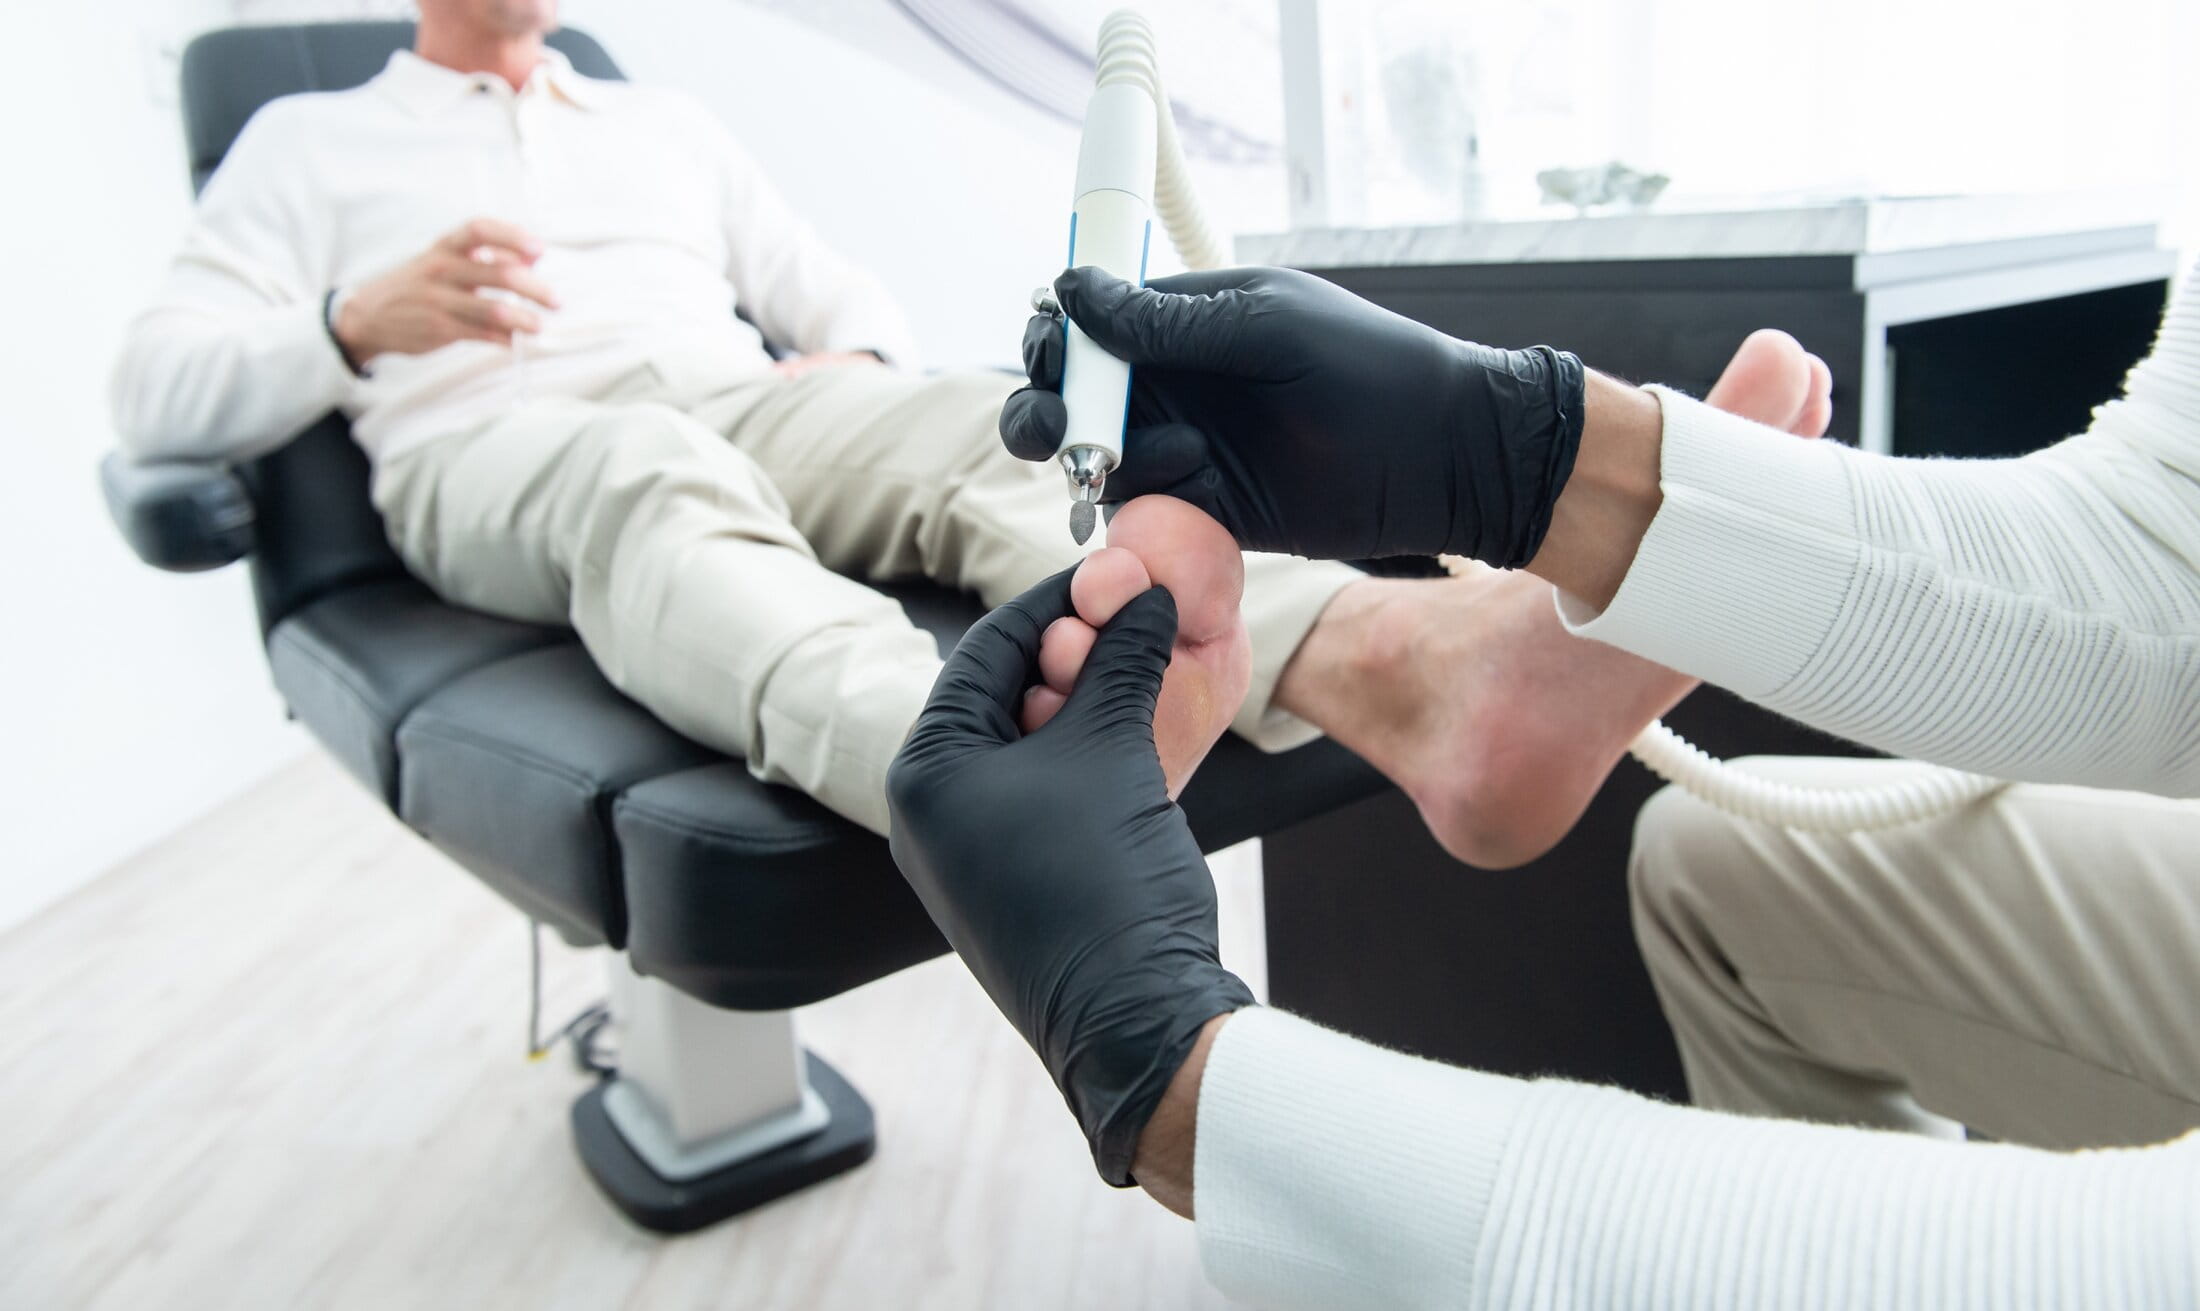 Mississauga chiropodist using a podiatry drill on a patient's foot